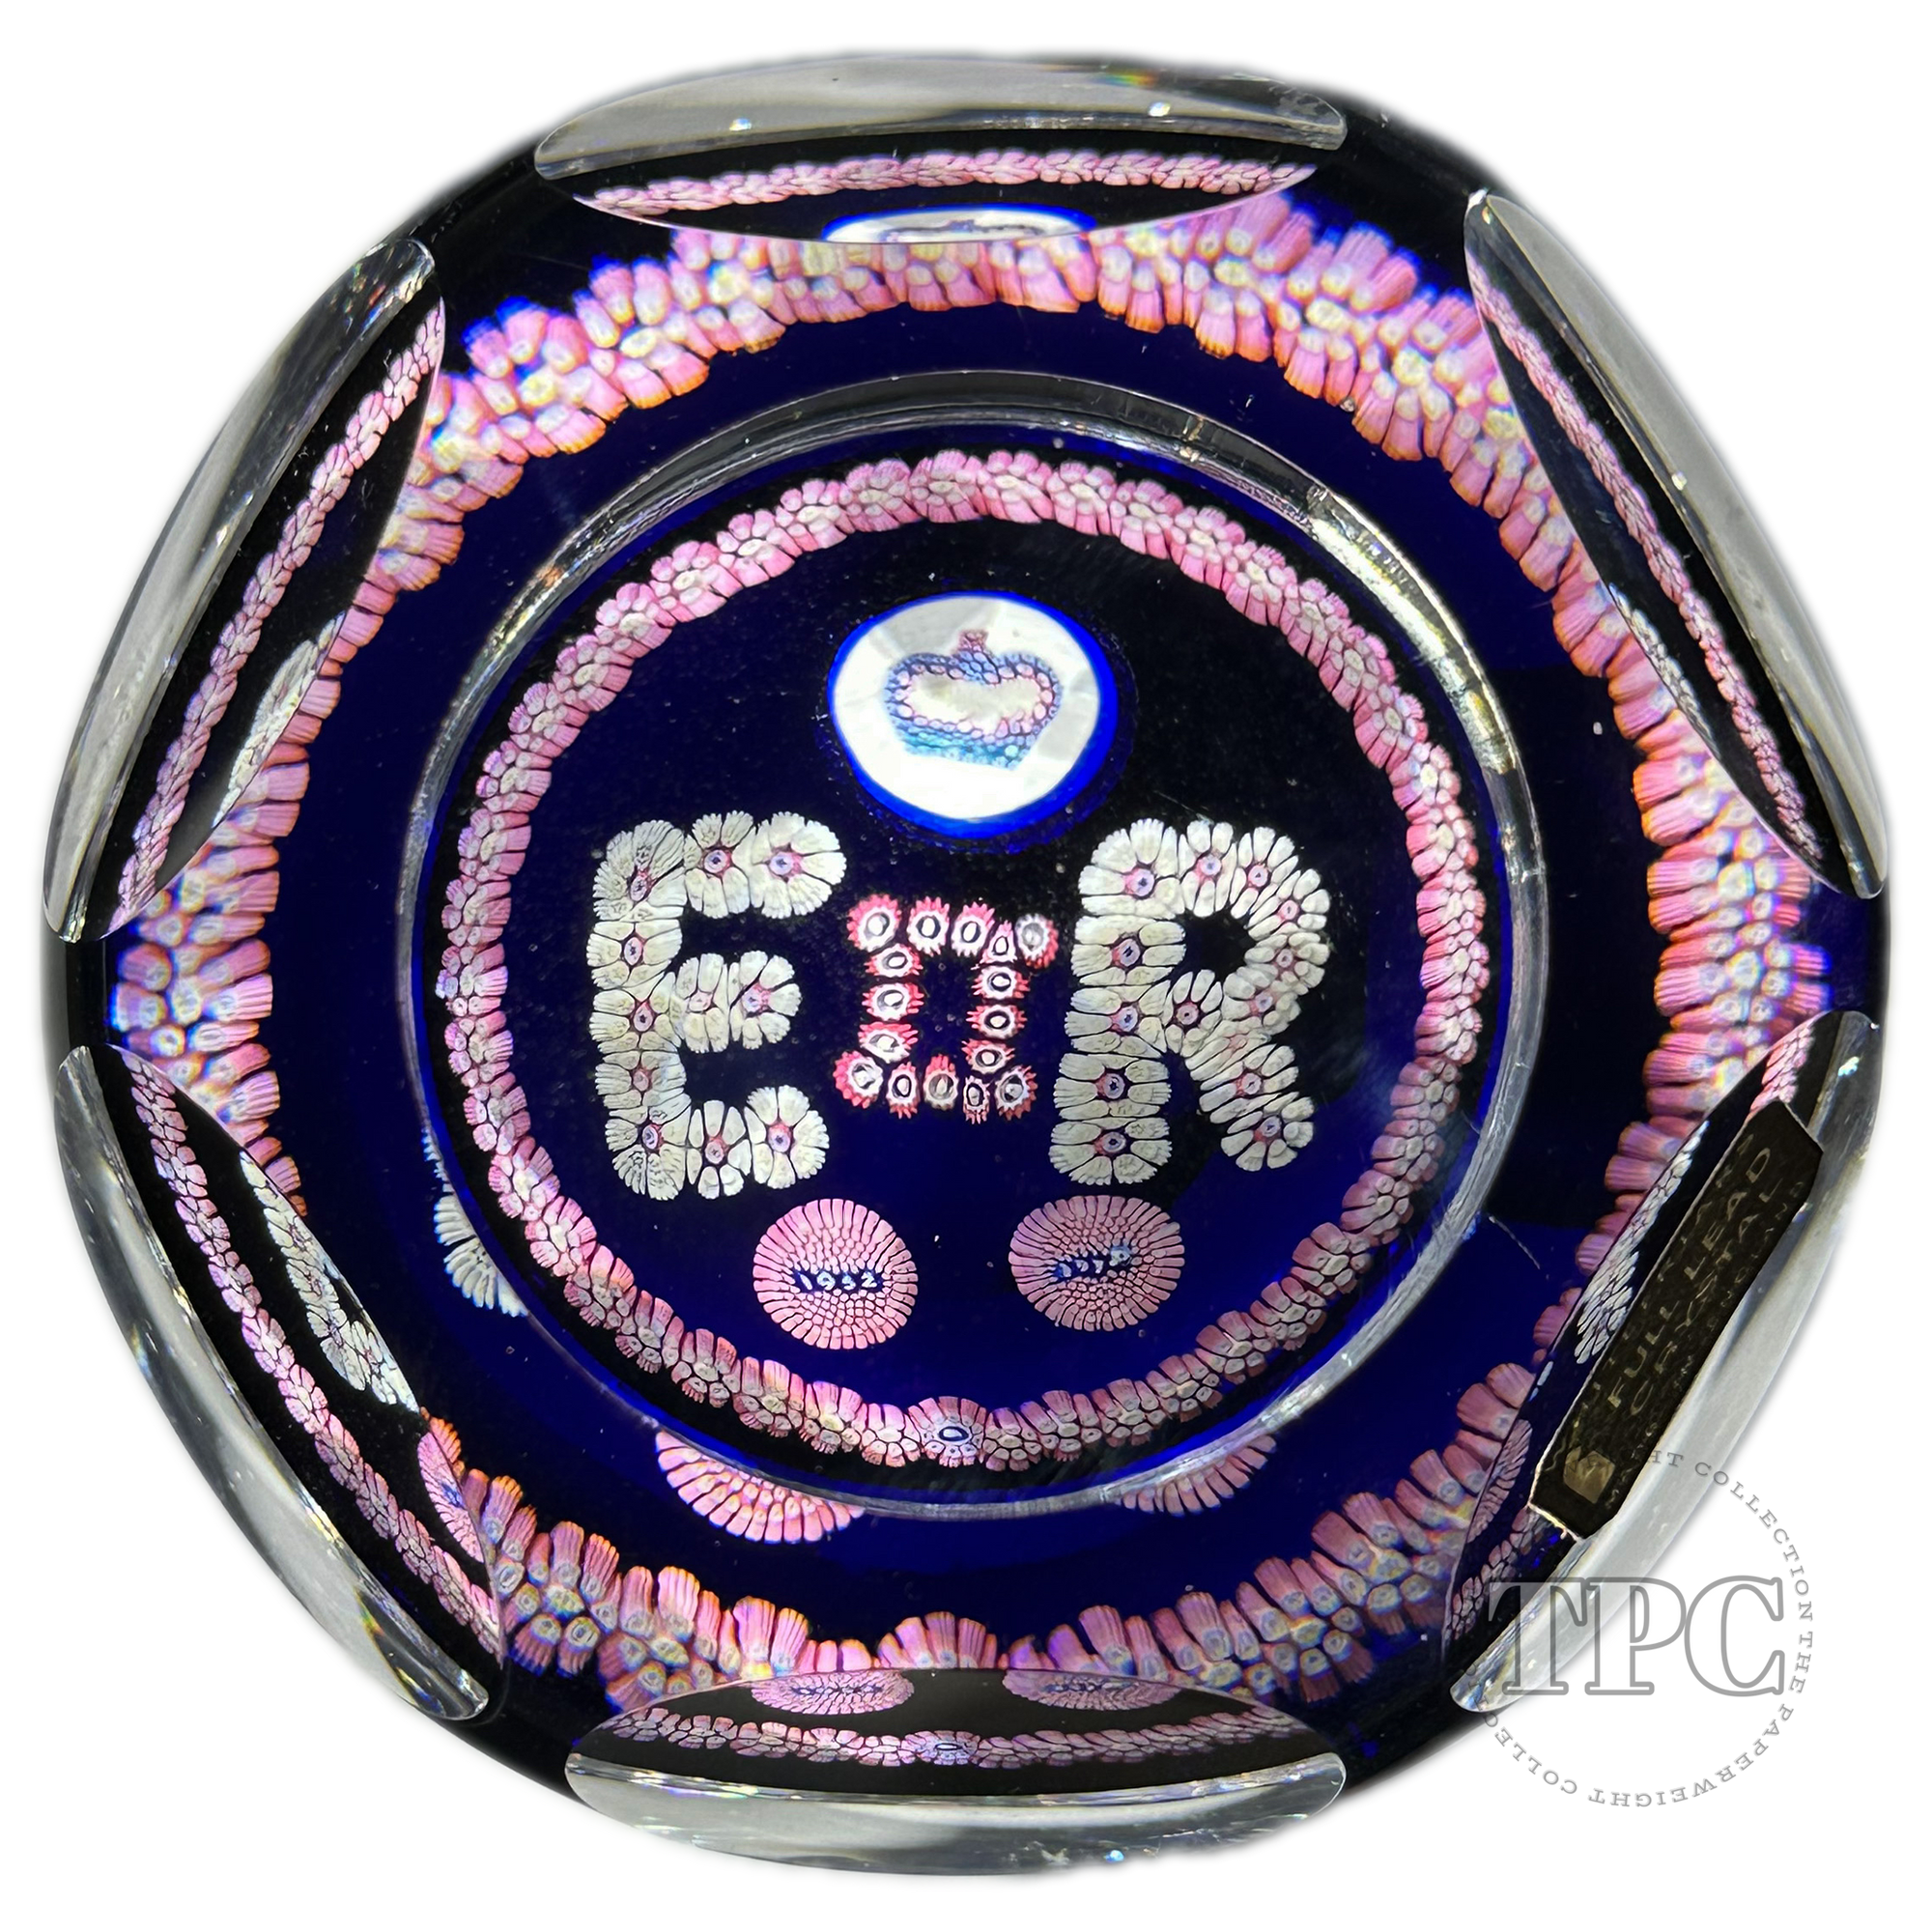 Whitefriars 1977 Glass Art Paperweight Queen's Silver Jubilee Patterned EIIR Millefiori with Crown Murrine